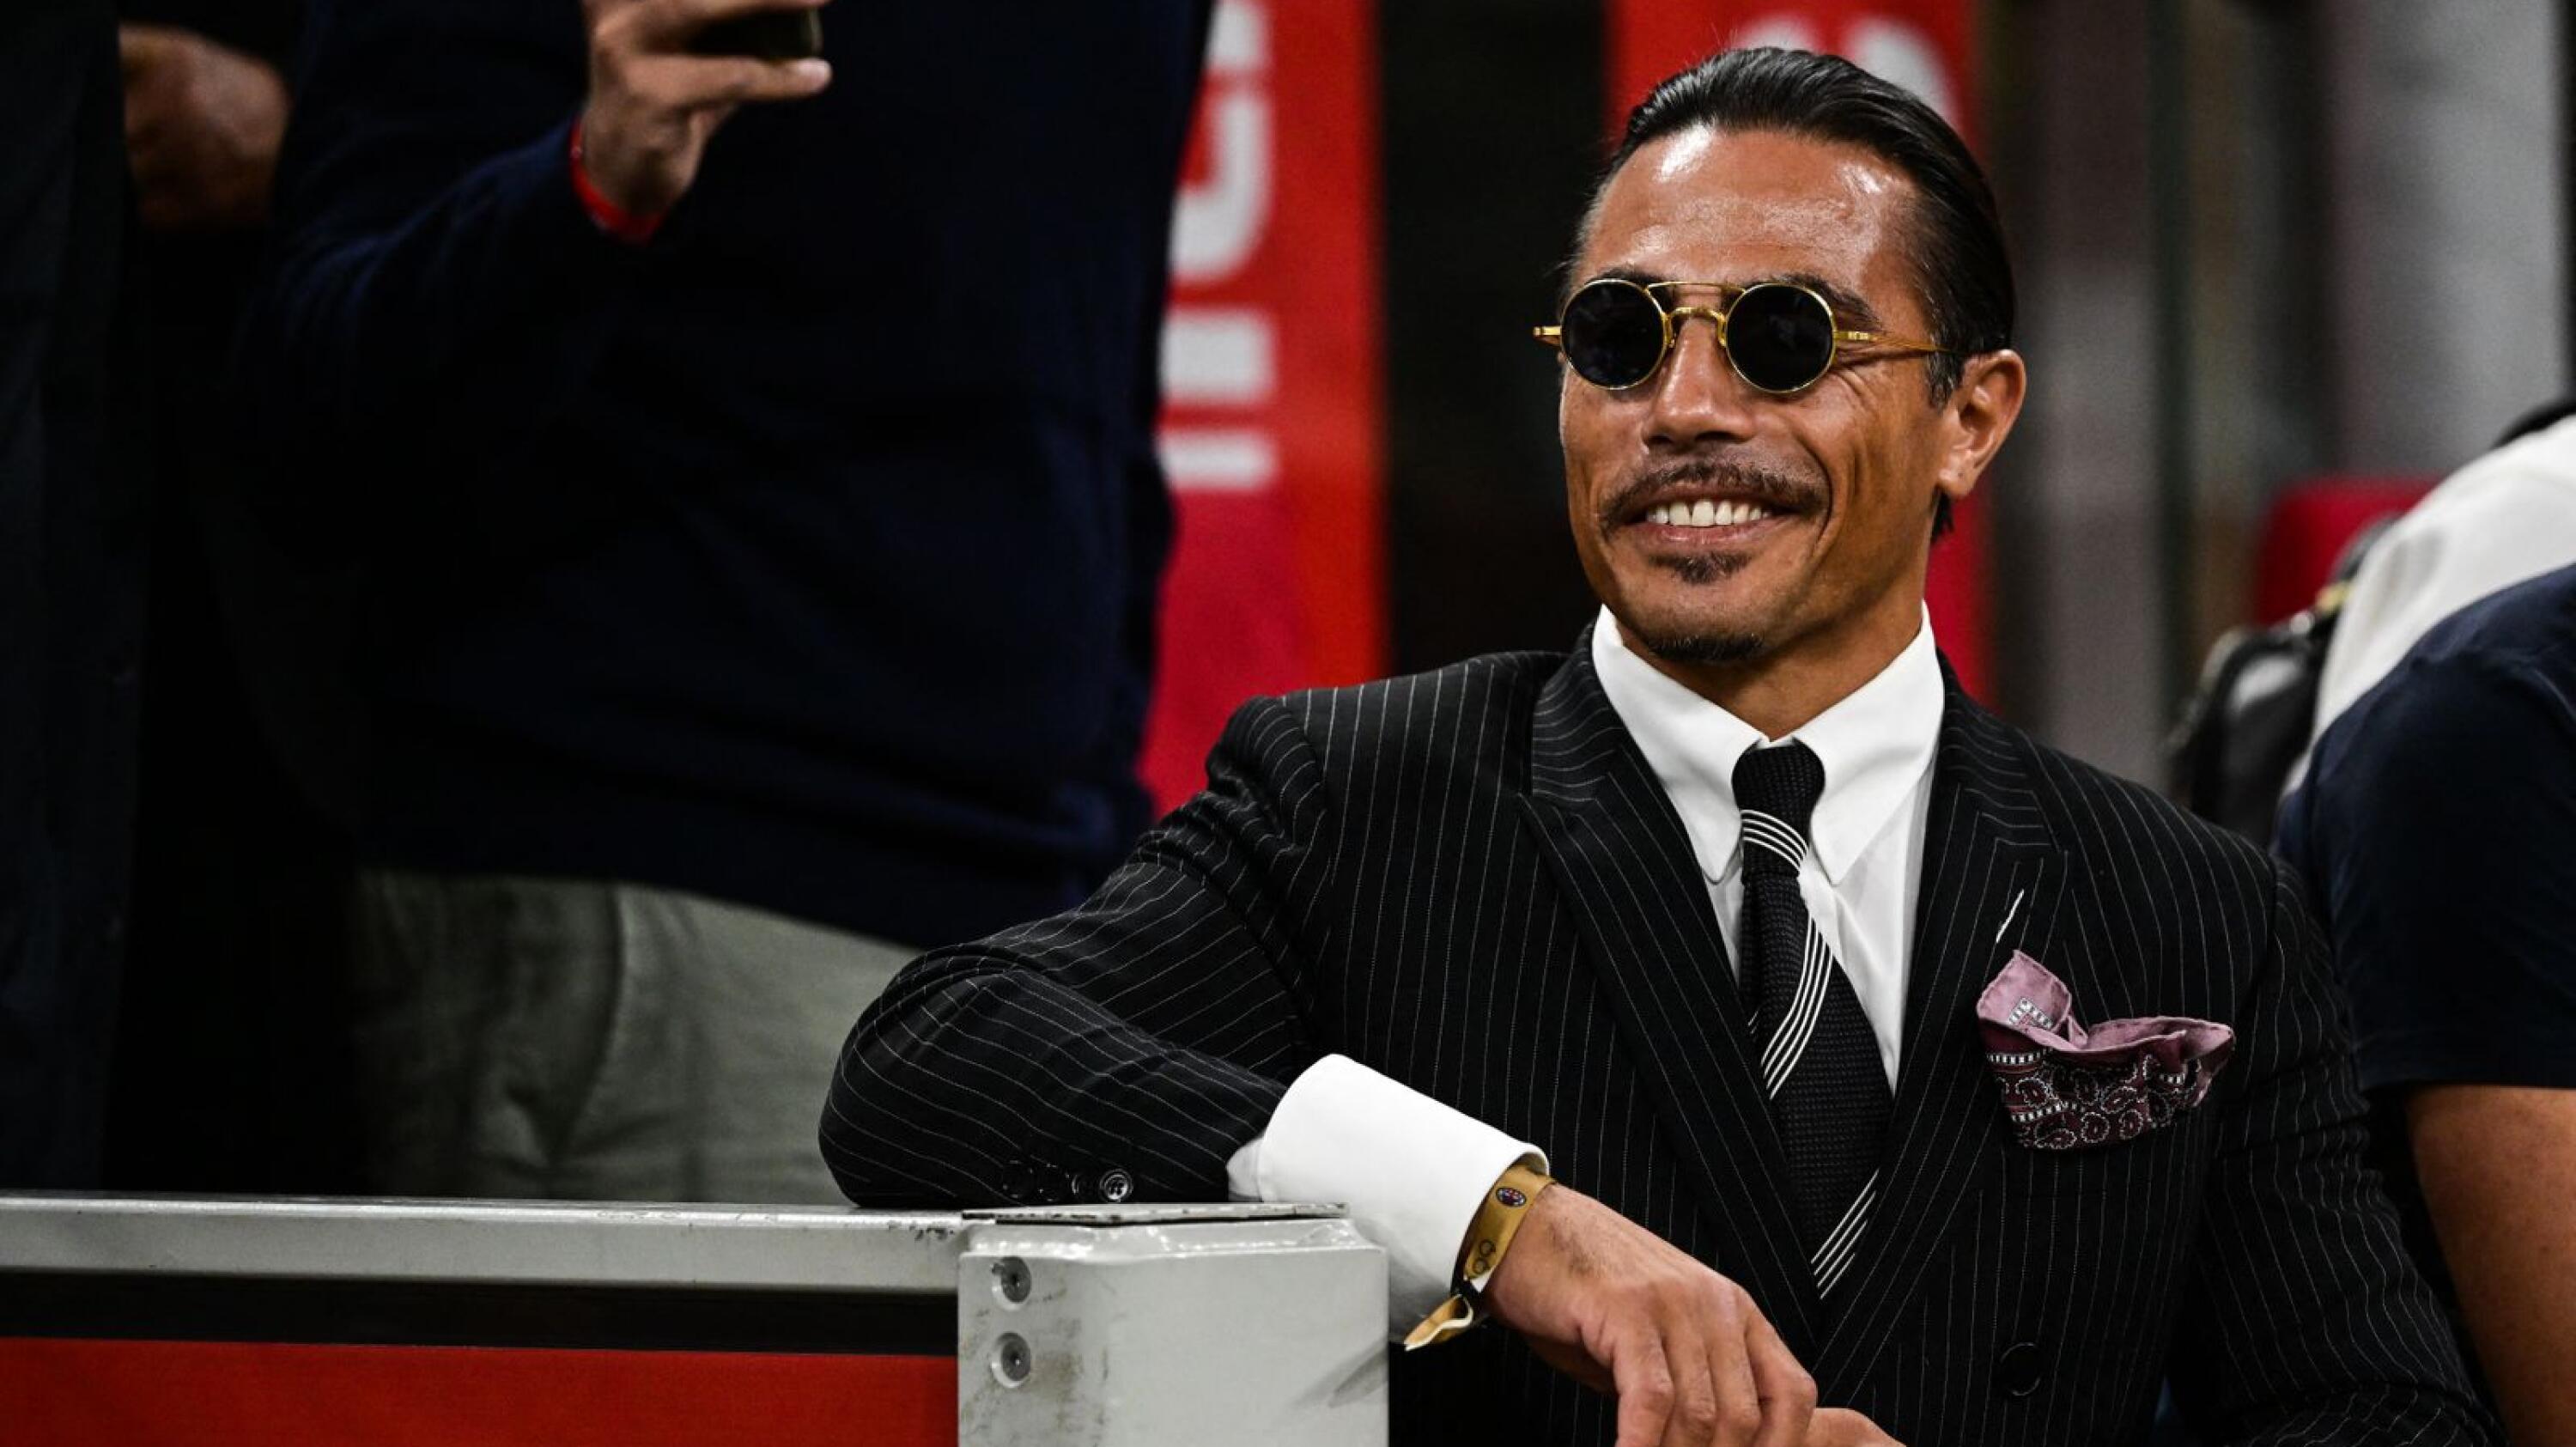 Turkish butcher, chef, food entertainer and restaurateur, Nusret Gokçe, nicknamed Salt Bae, attends the Italian Serie A football match between AC Milan and Napoli at the San Siro Stadium in Milan